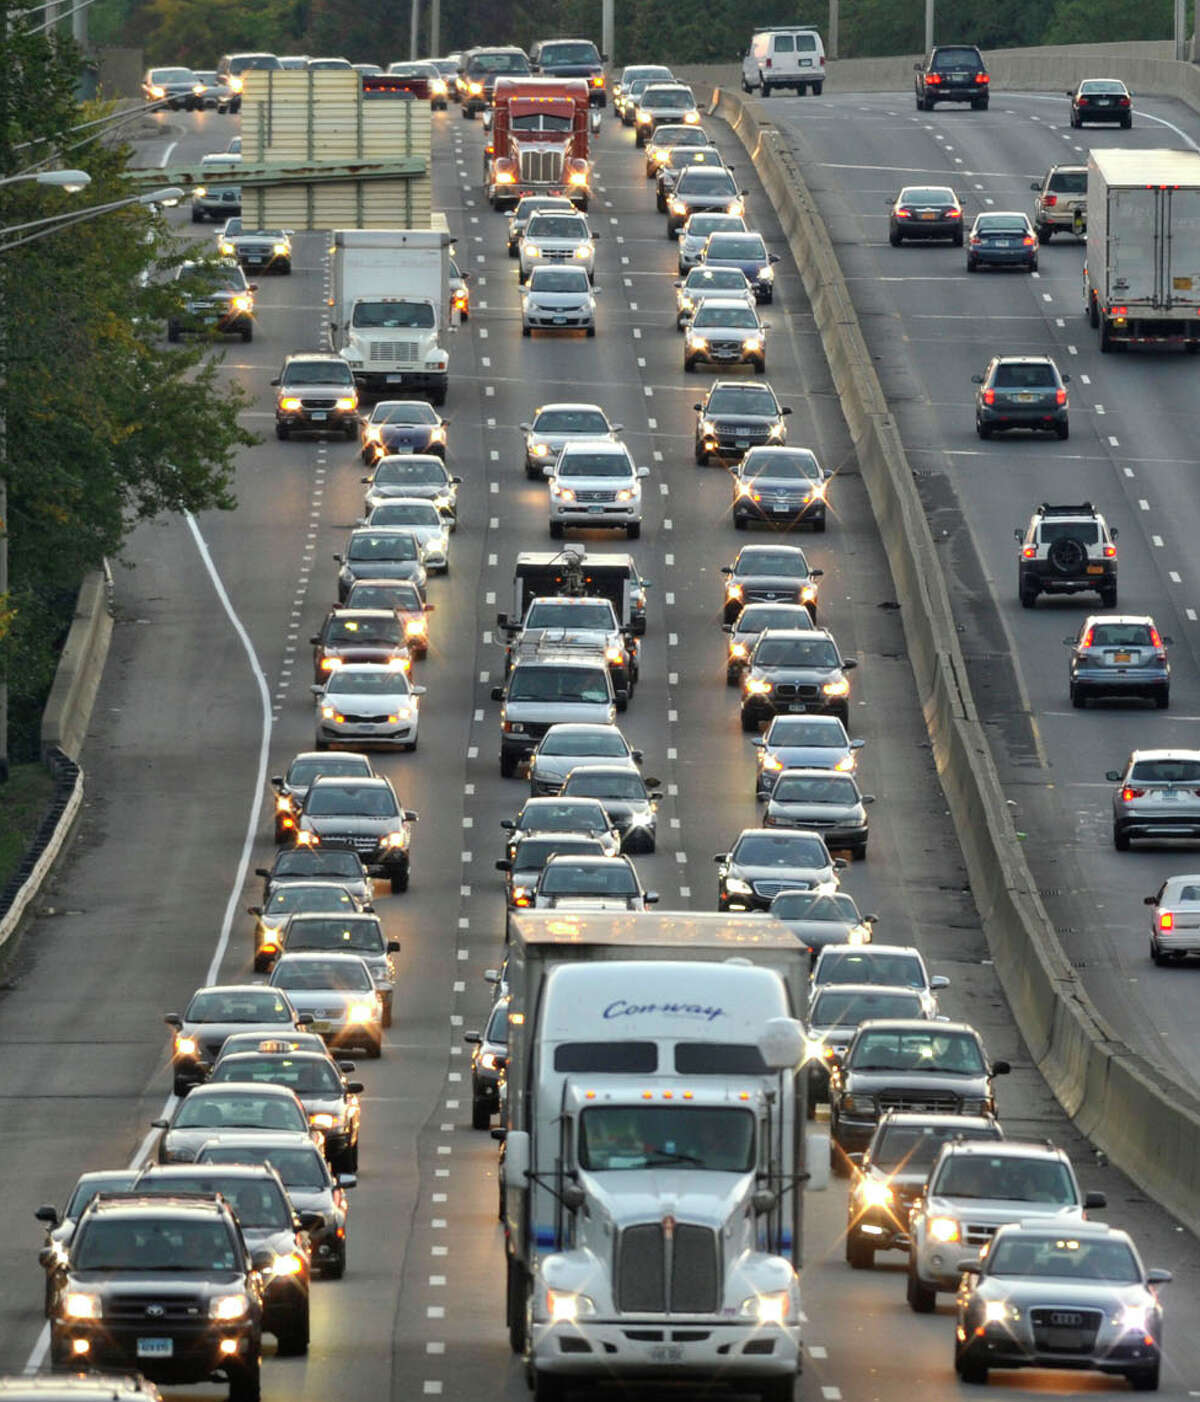 Stamford traffic is one of the worst in the country, according to a new study. We gathered the 20 U.S. cities with the worst congestion in the following gallery. Click through to see how they rank.